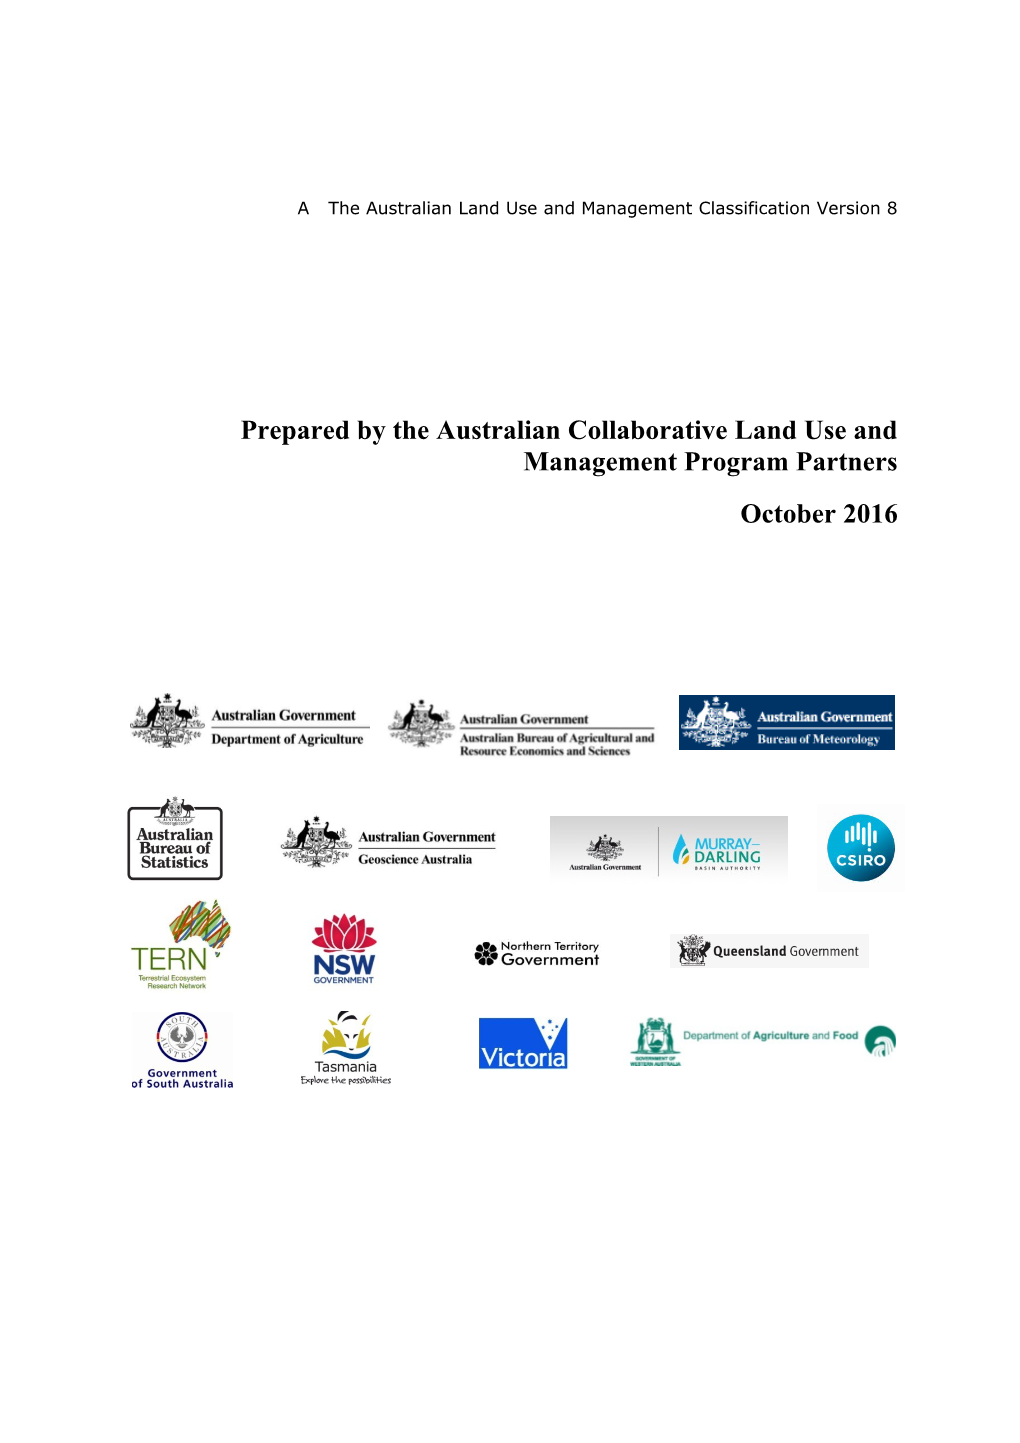 The Australian Land Use and Management Classification Version 8